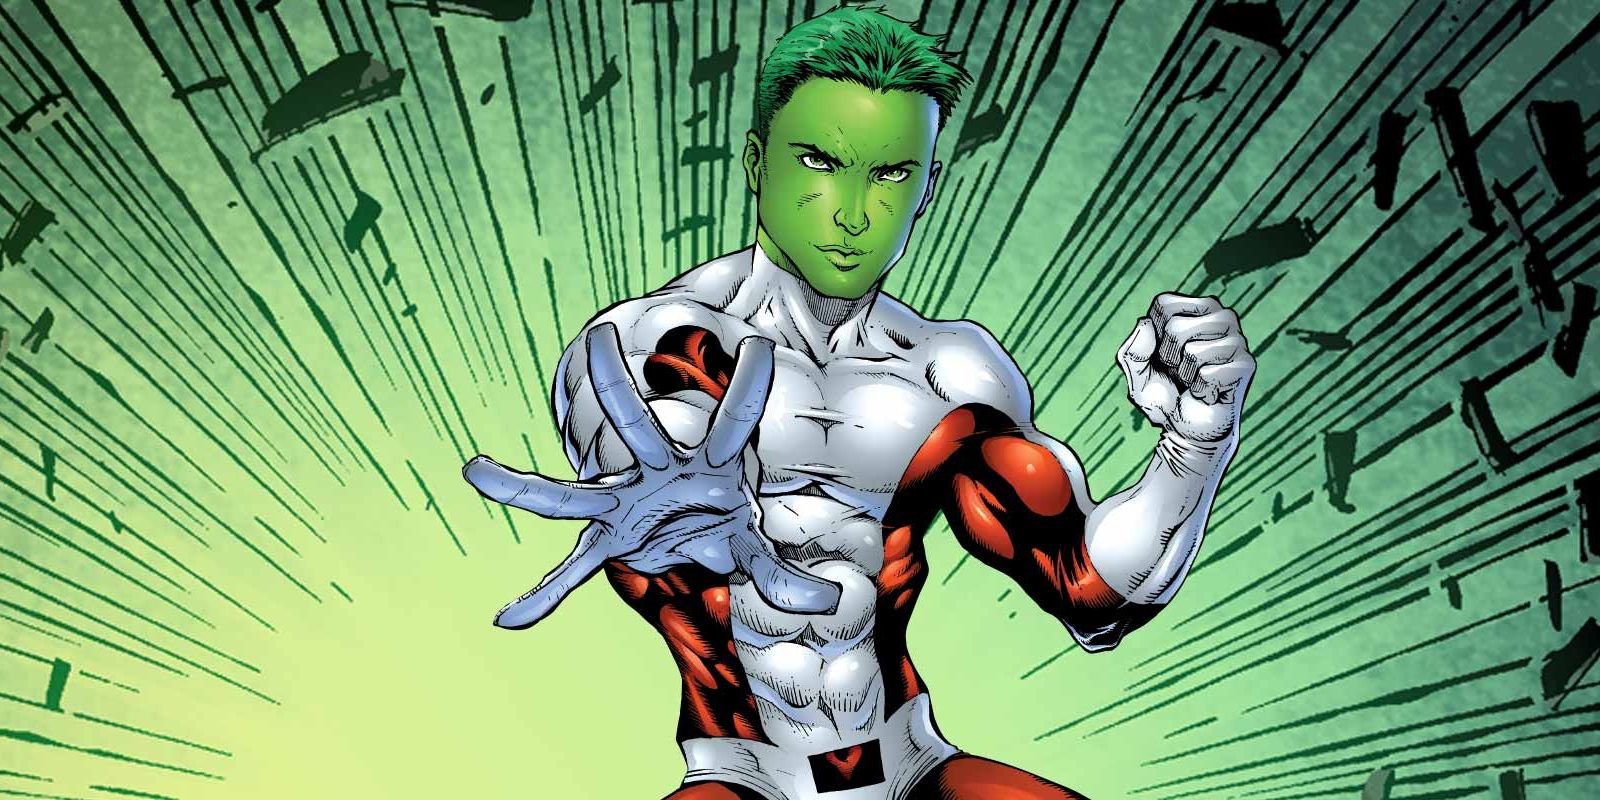 Beast Boy against a green background in the comics